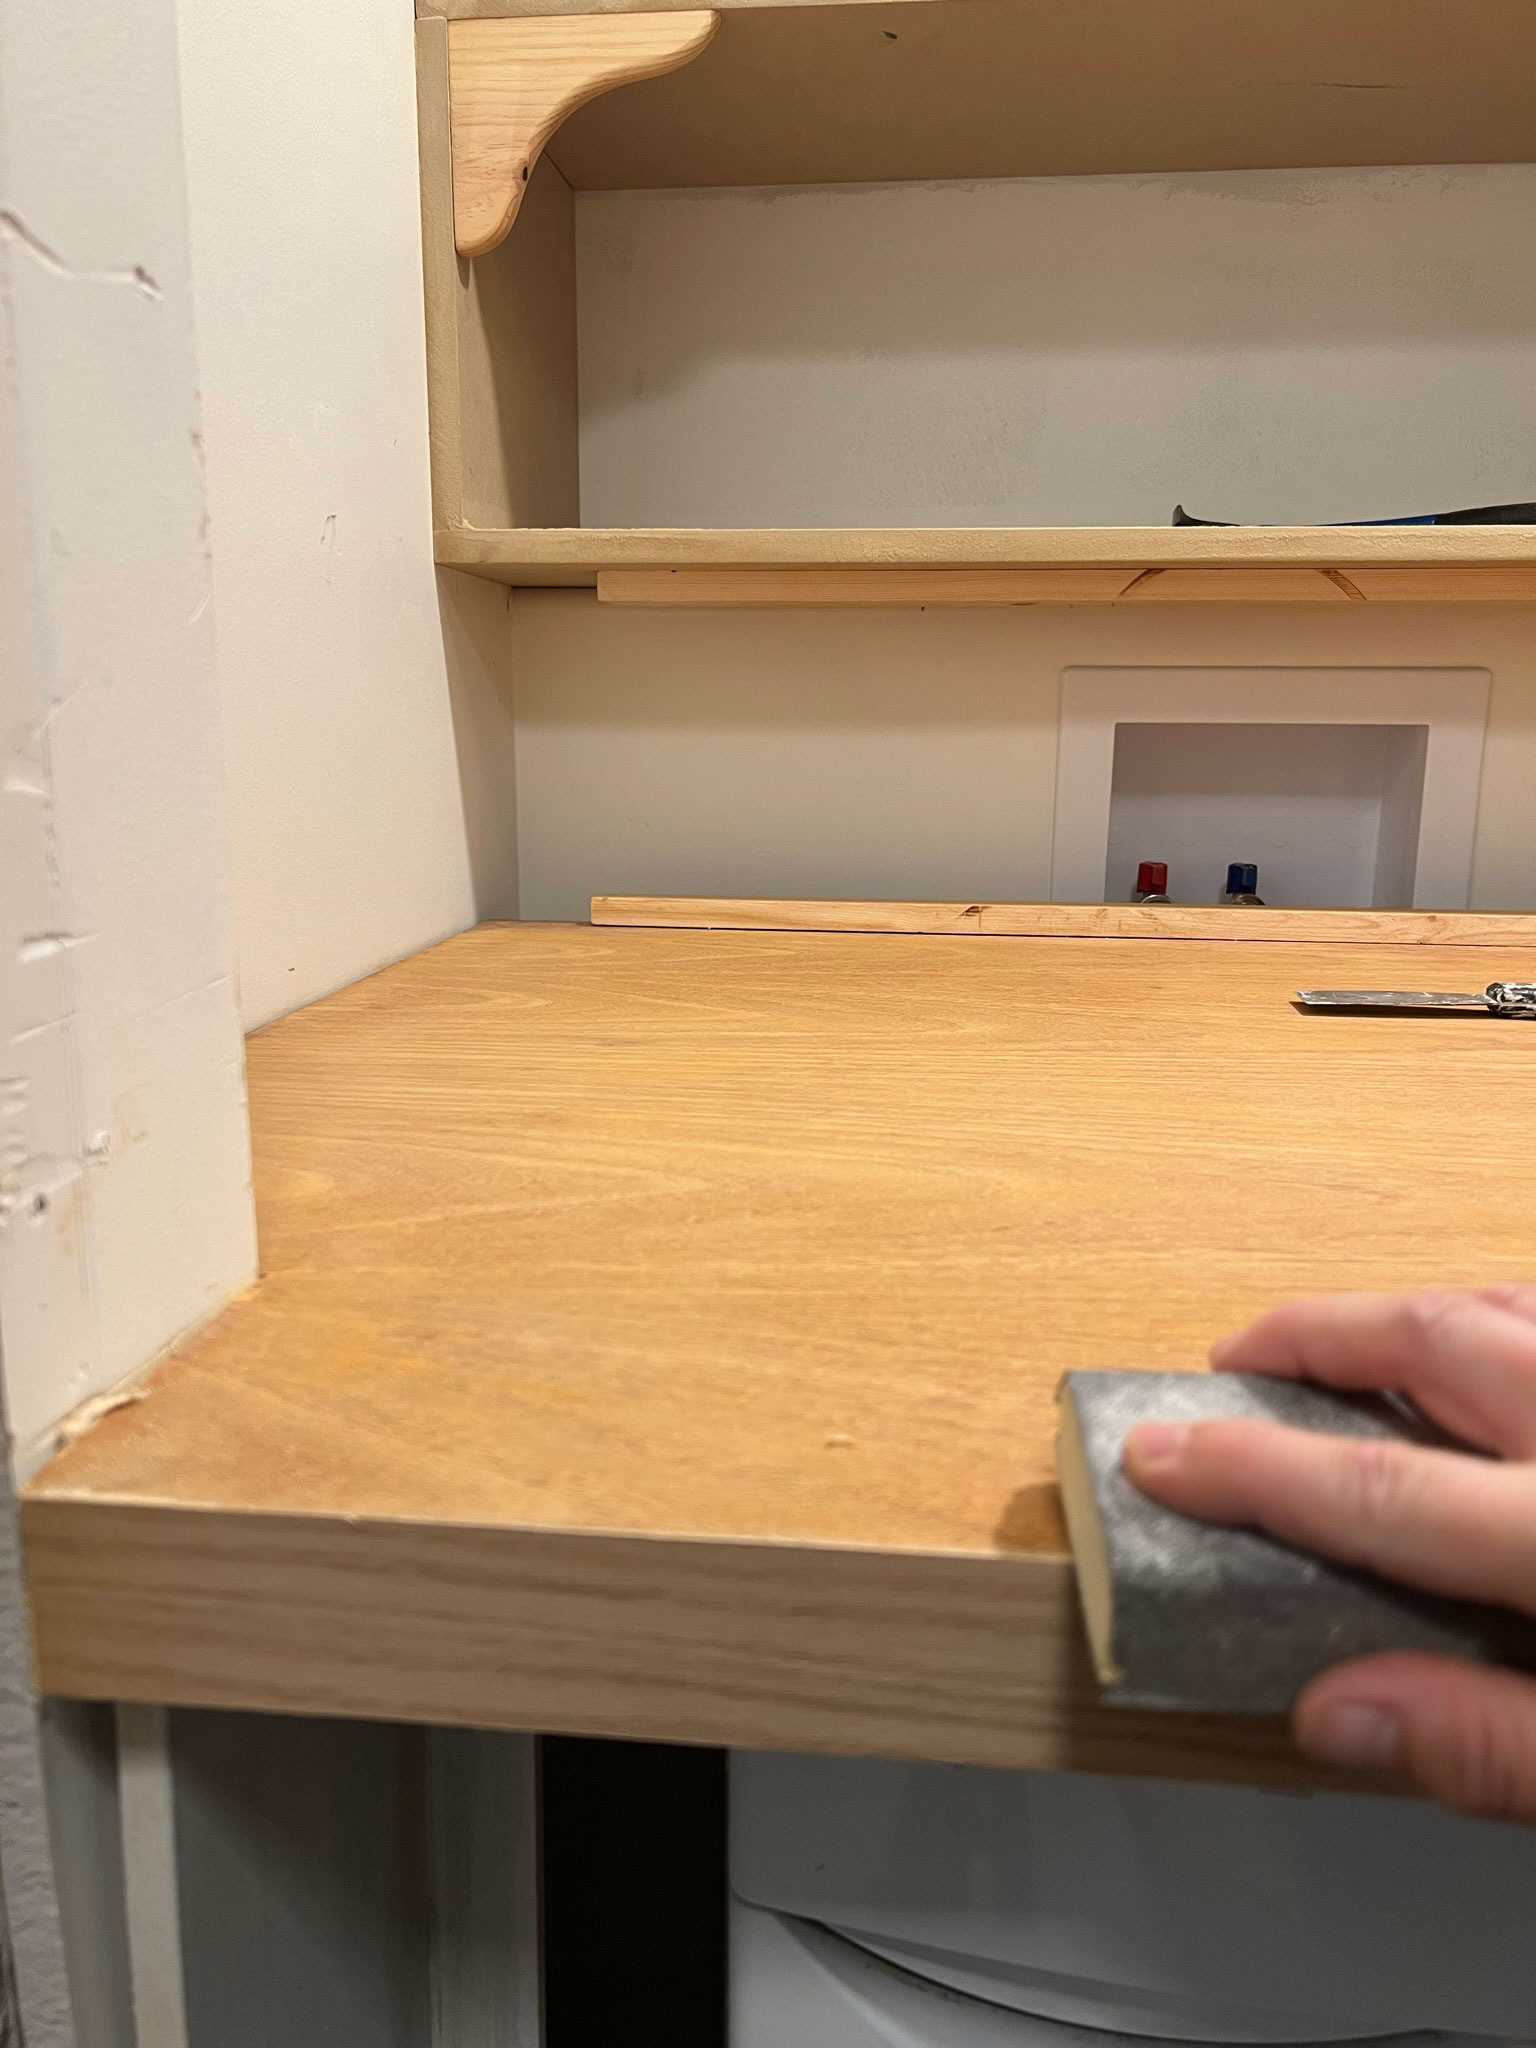 sanding the edge of veneer on the wood door we used to make the DIY laundry room countertop by hand with a sanding block